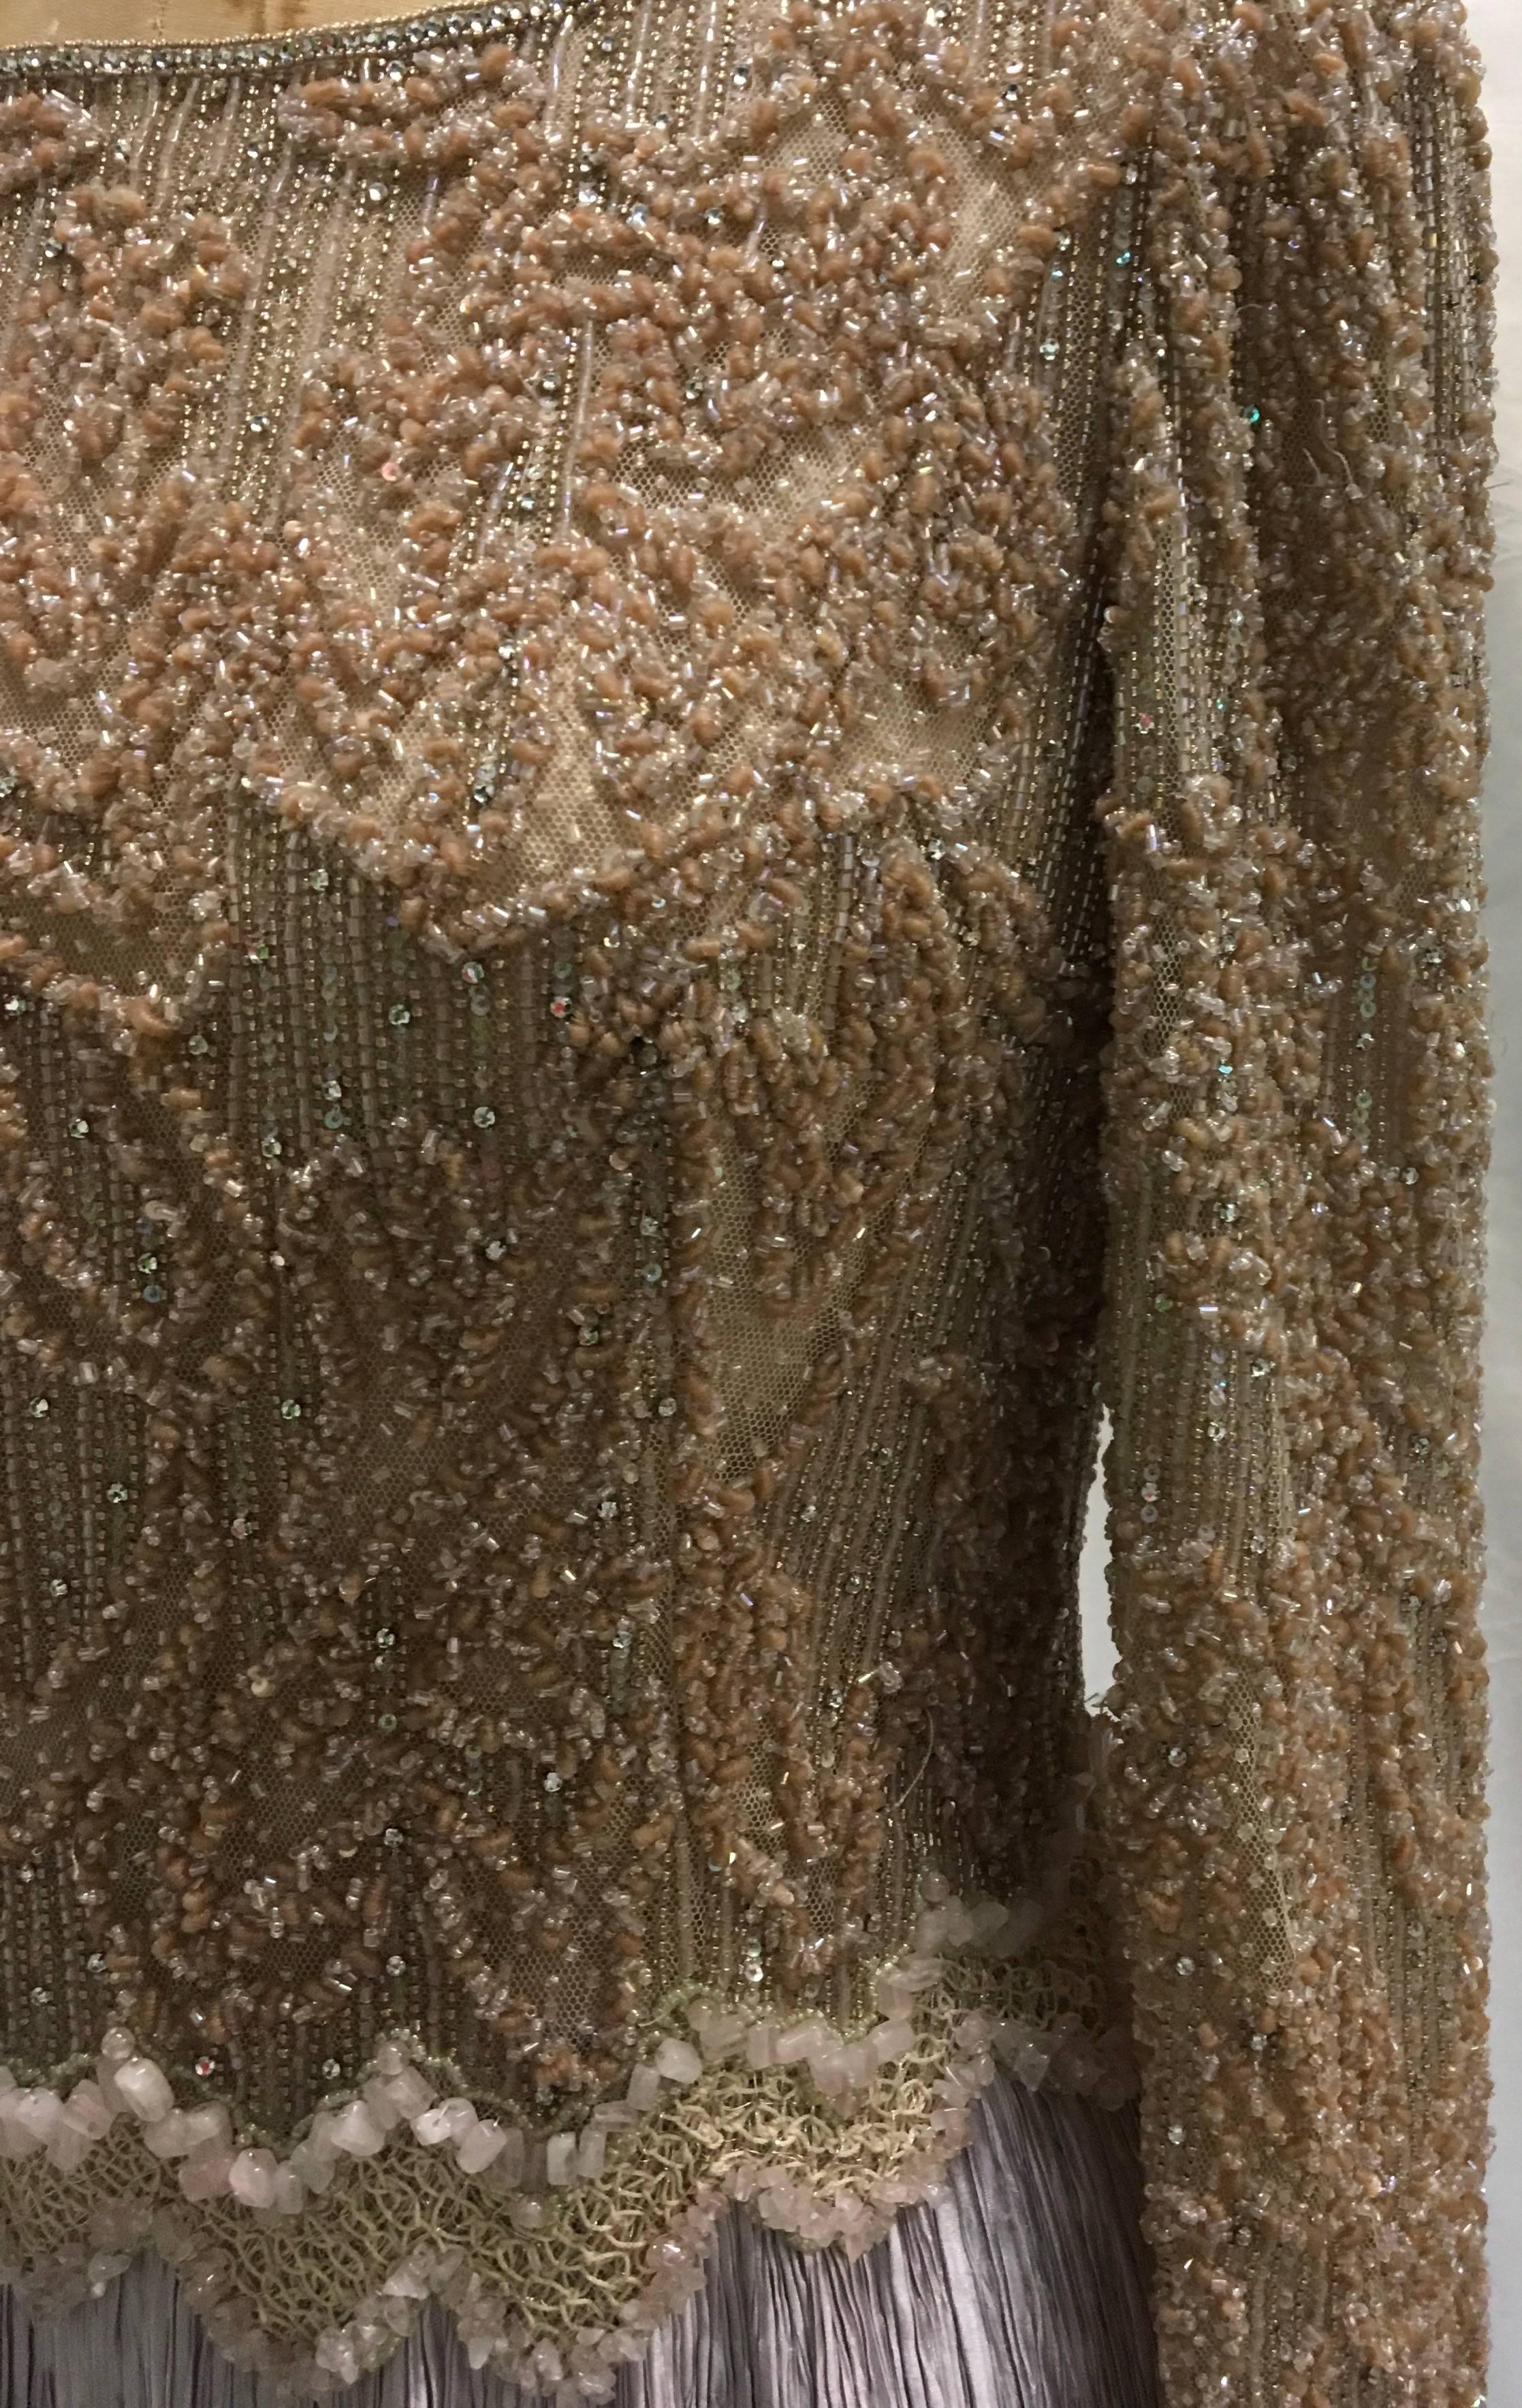 Presented here is a Mary McFadden silk gown couture silk gown with beading and sequins. This stunning 1980's Mary McFadden tan and lavender evening gown is a heavenly masterpiece that takes you back to another time. The fabulous bead and sequin work